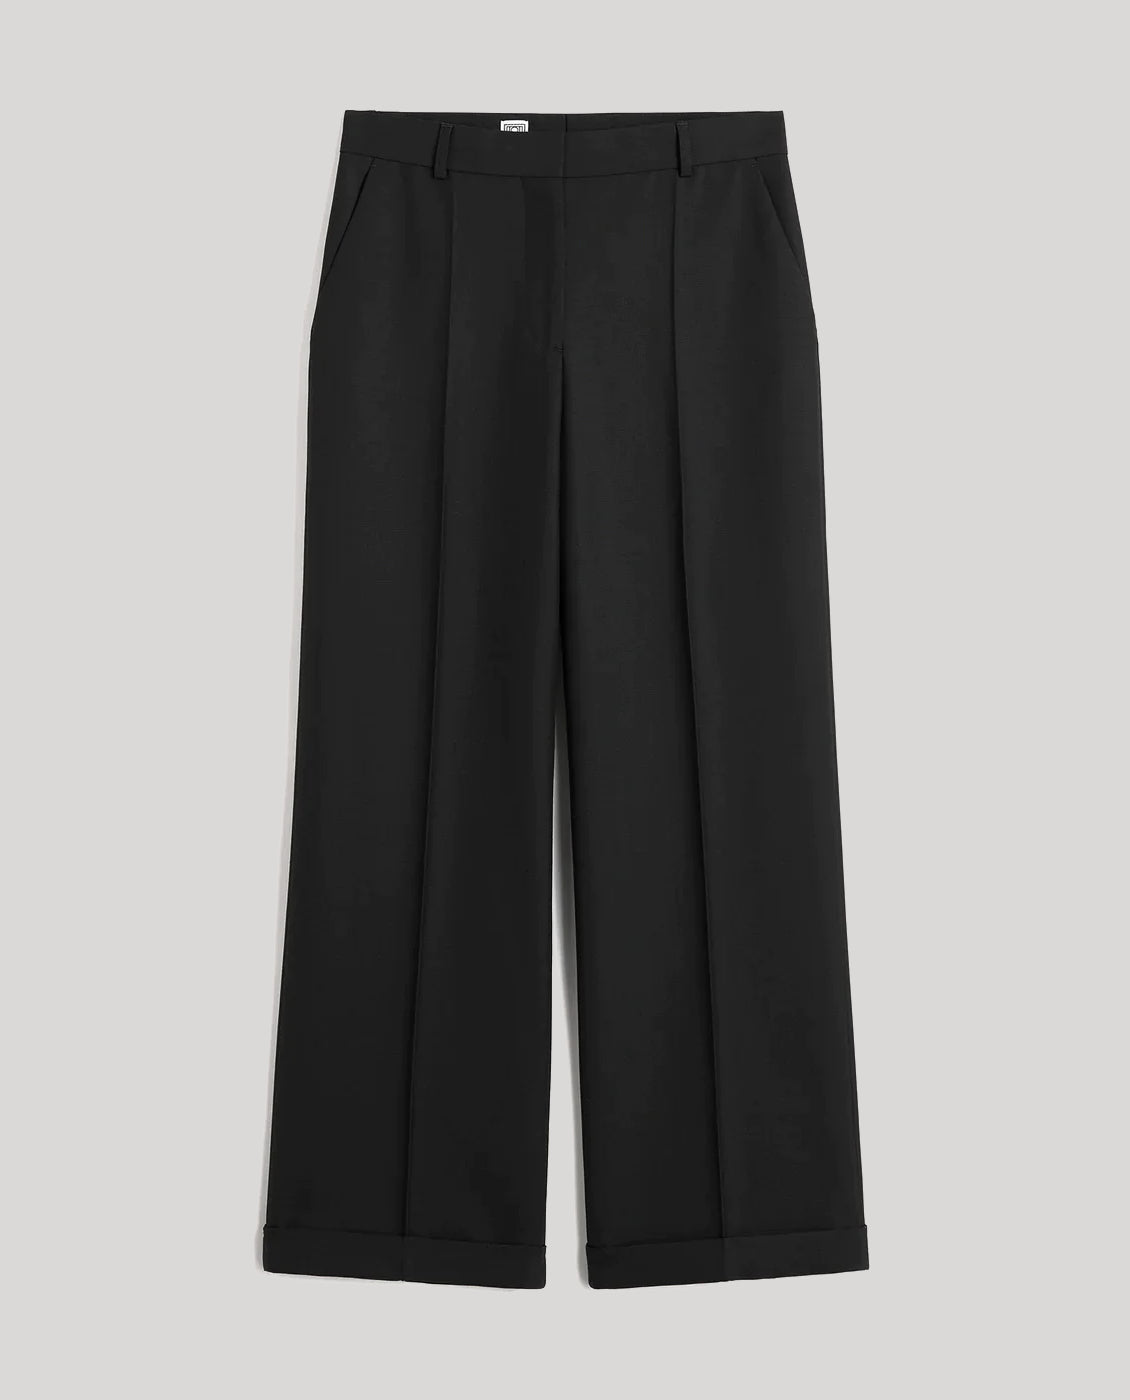 Toteme Black Tailored Suit Trousers